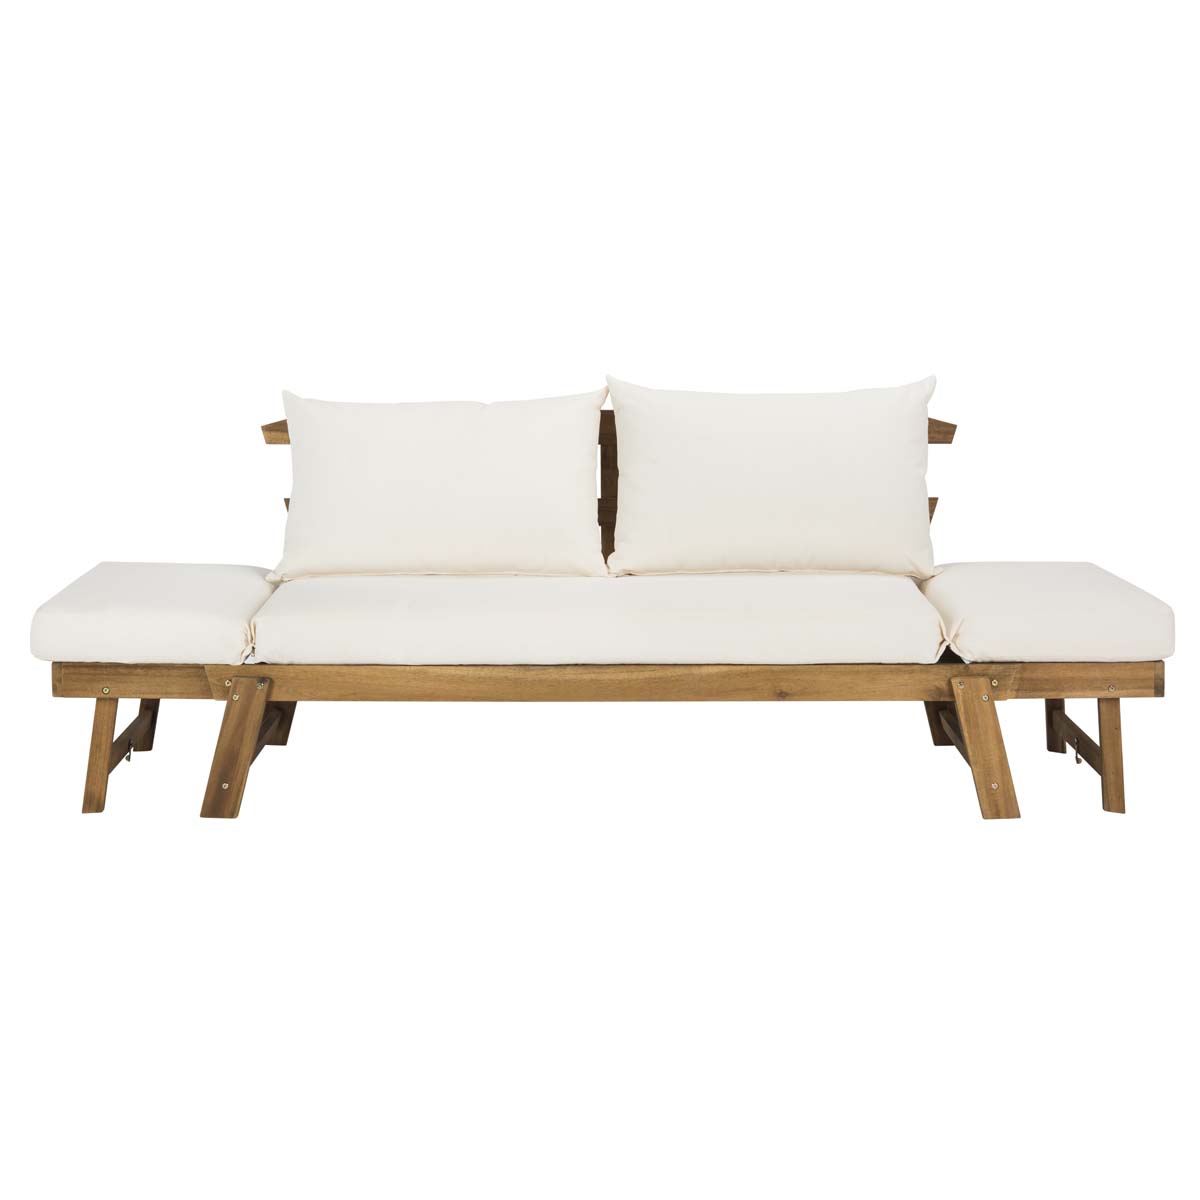 Safavieh Tandra Modern Contemporary Daybed , PAT6745 - Natural/Beige